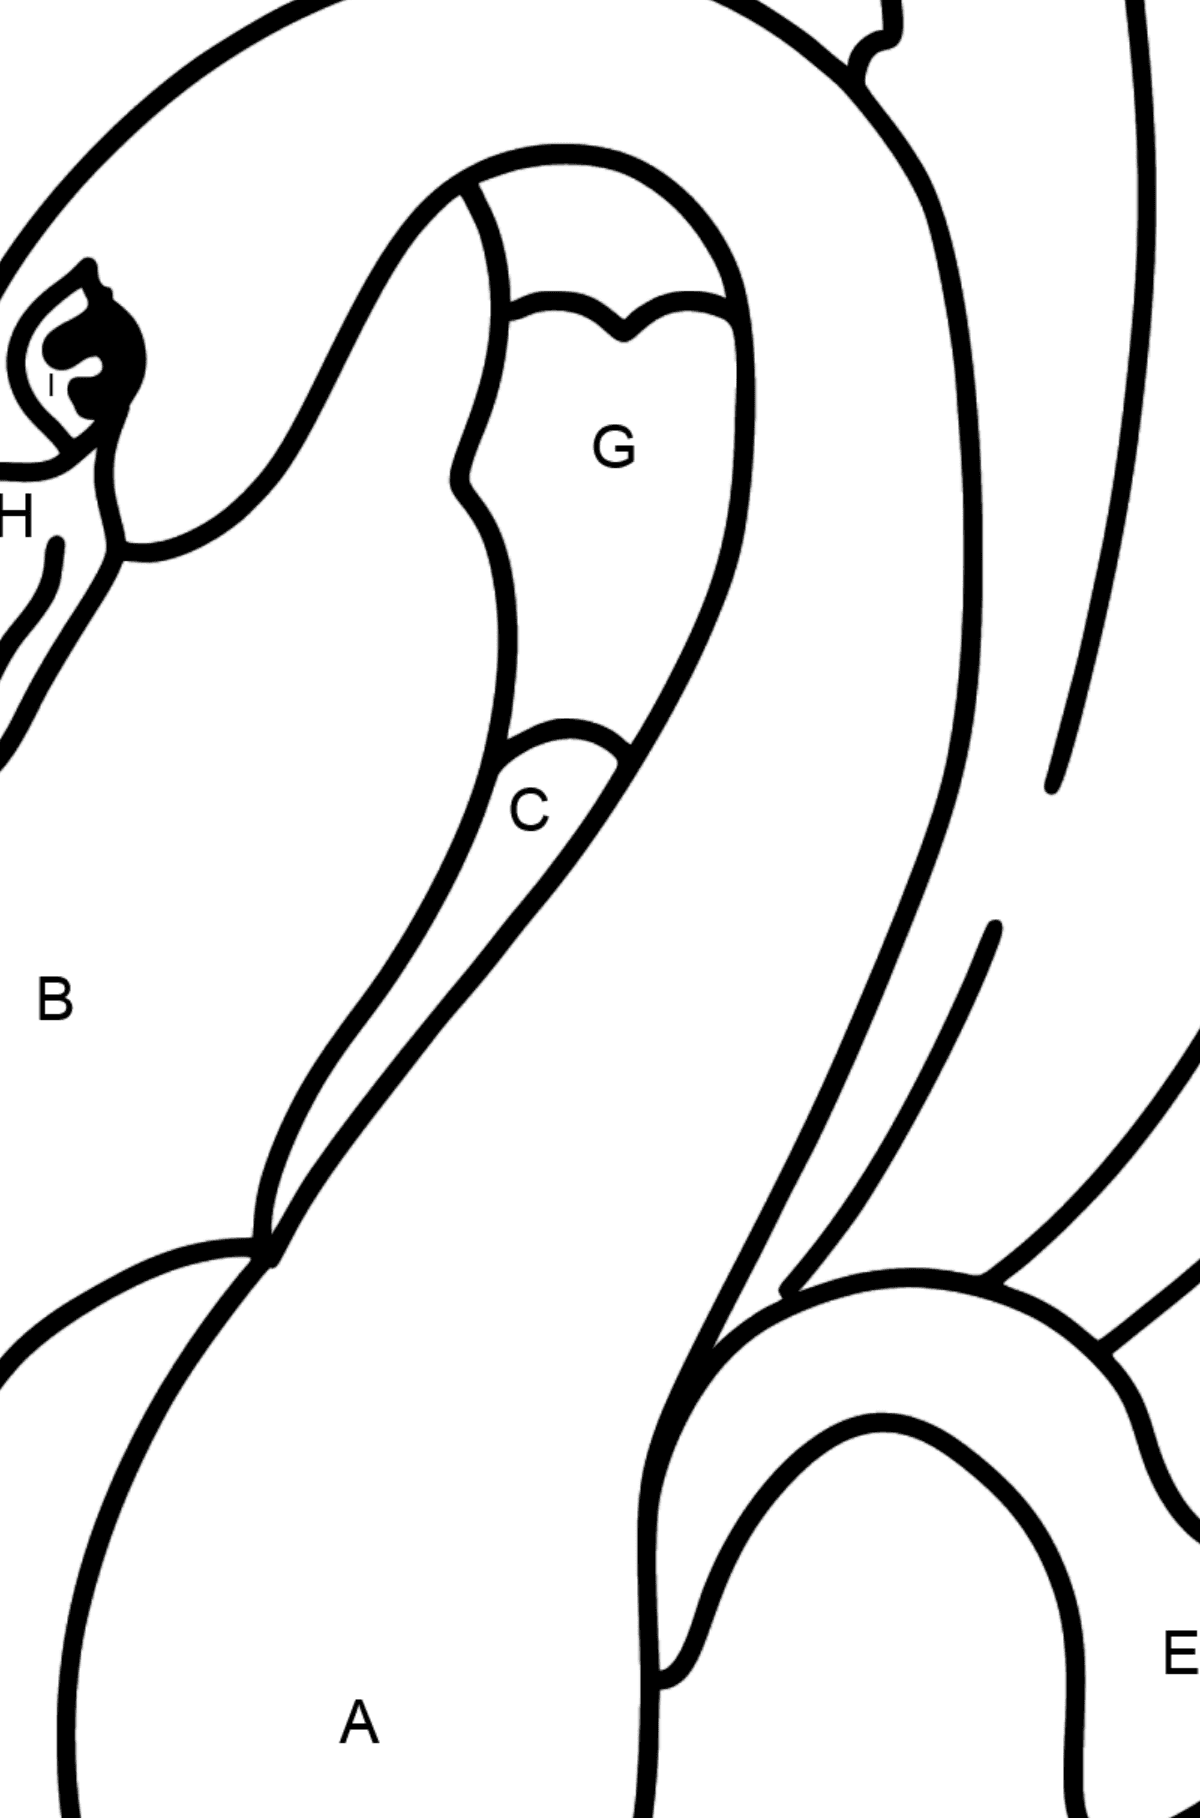 Black Swan coloring page - Coloring by Letters for Kids